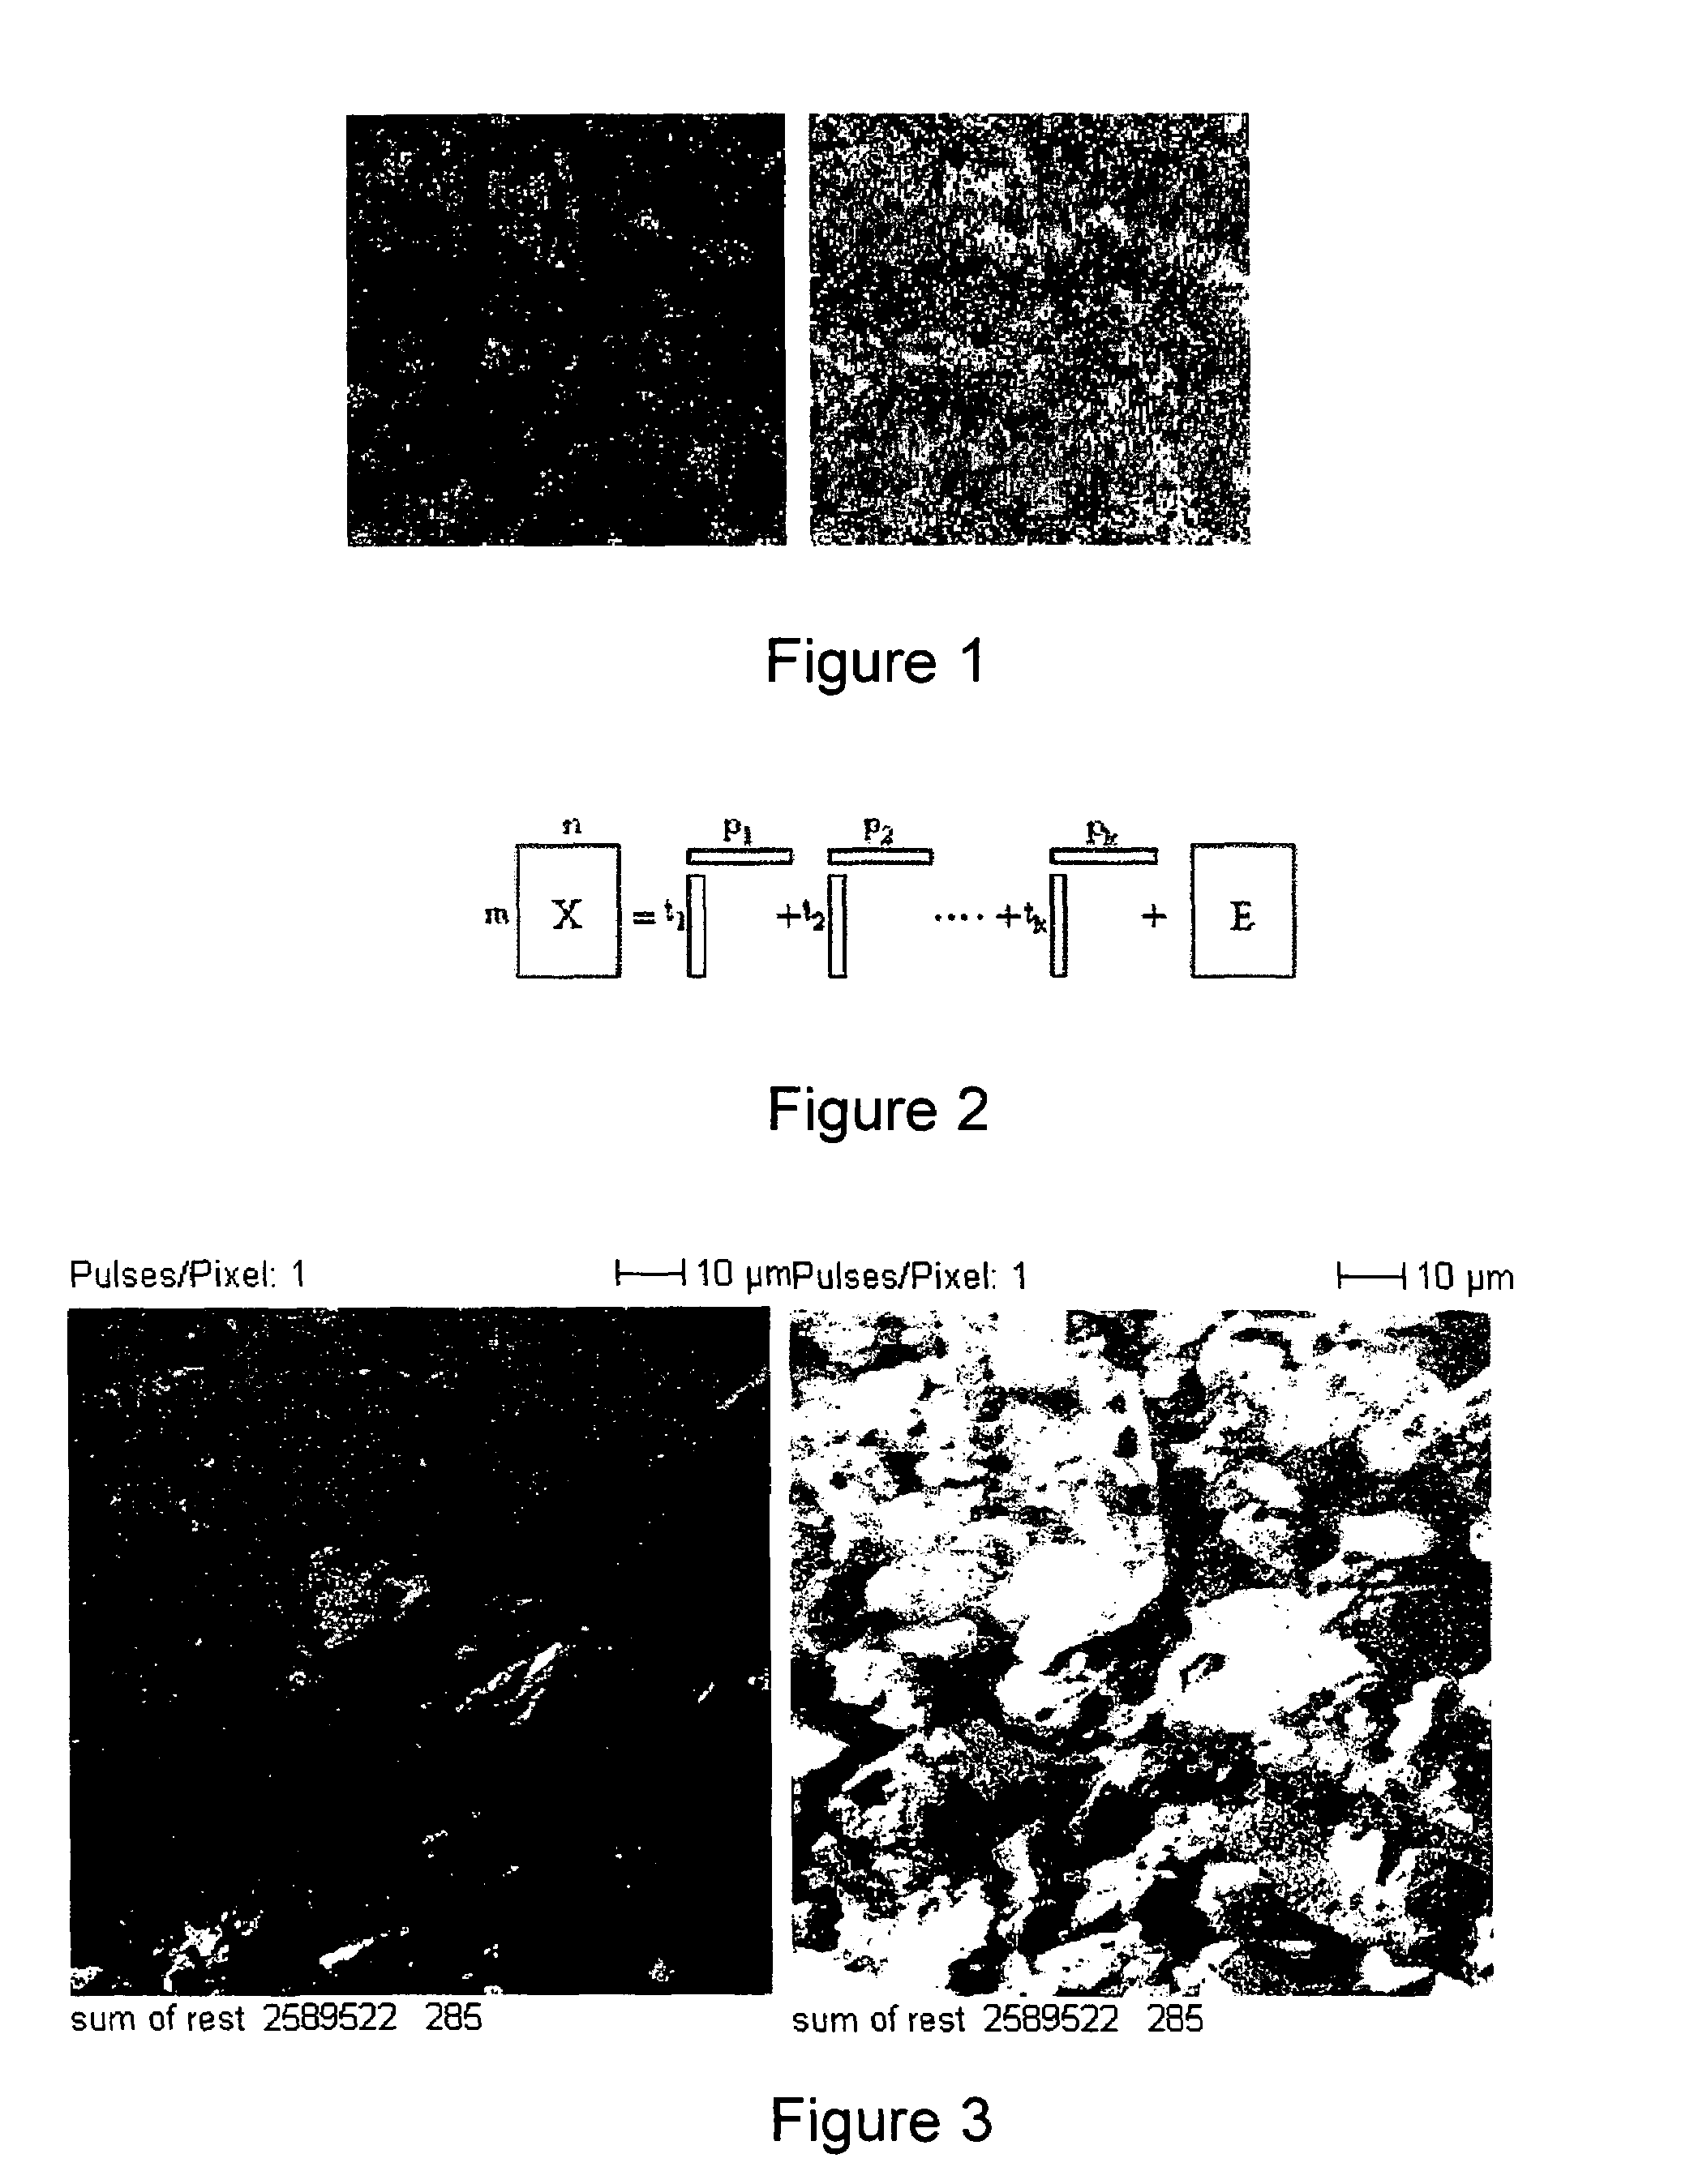 Statistical methods applied to surface chemistry in minerals flotation